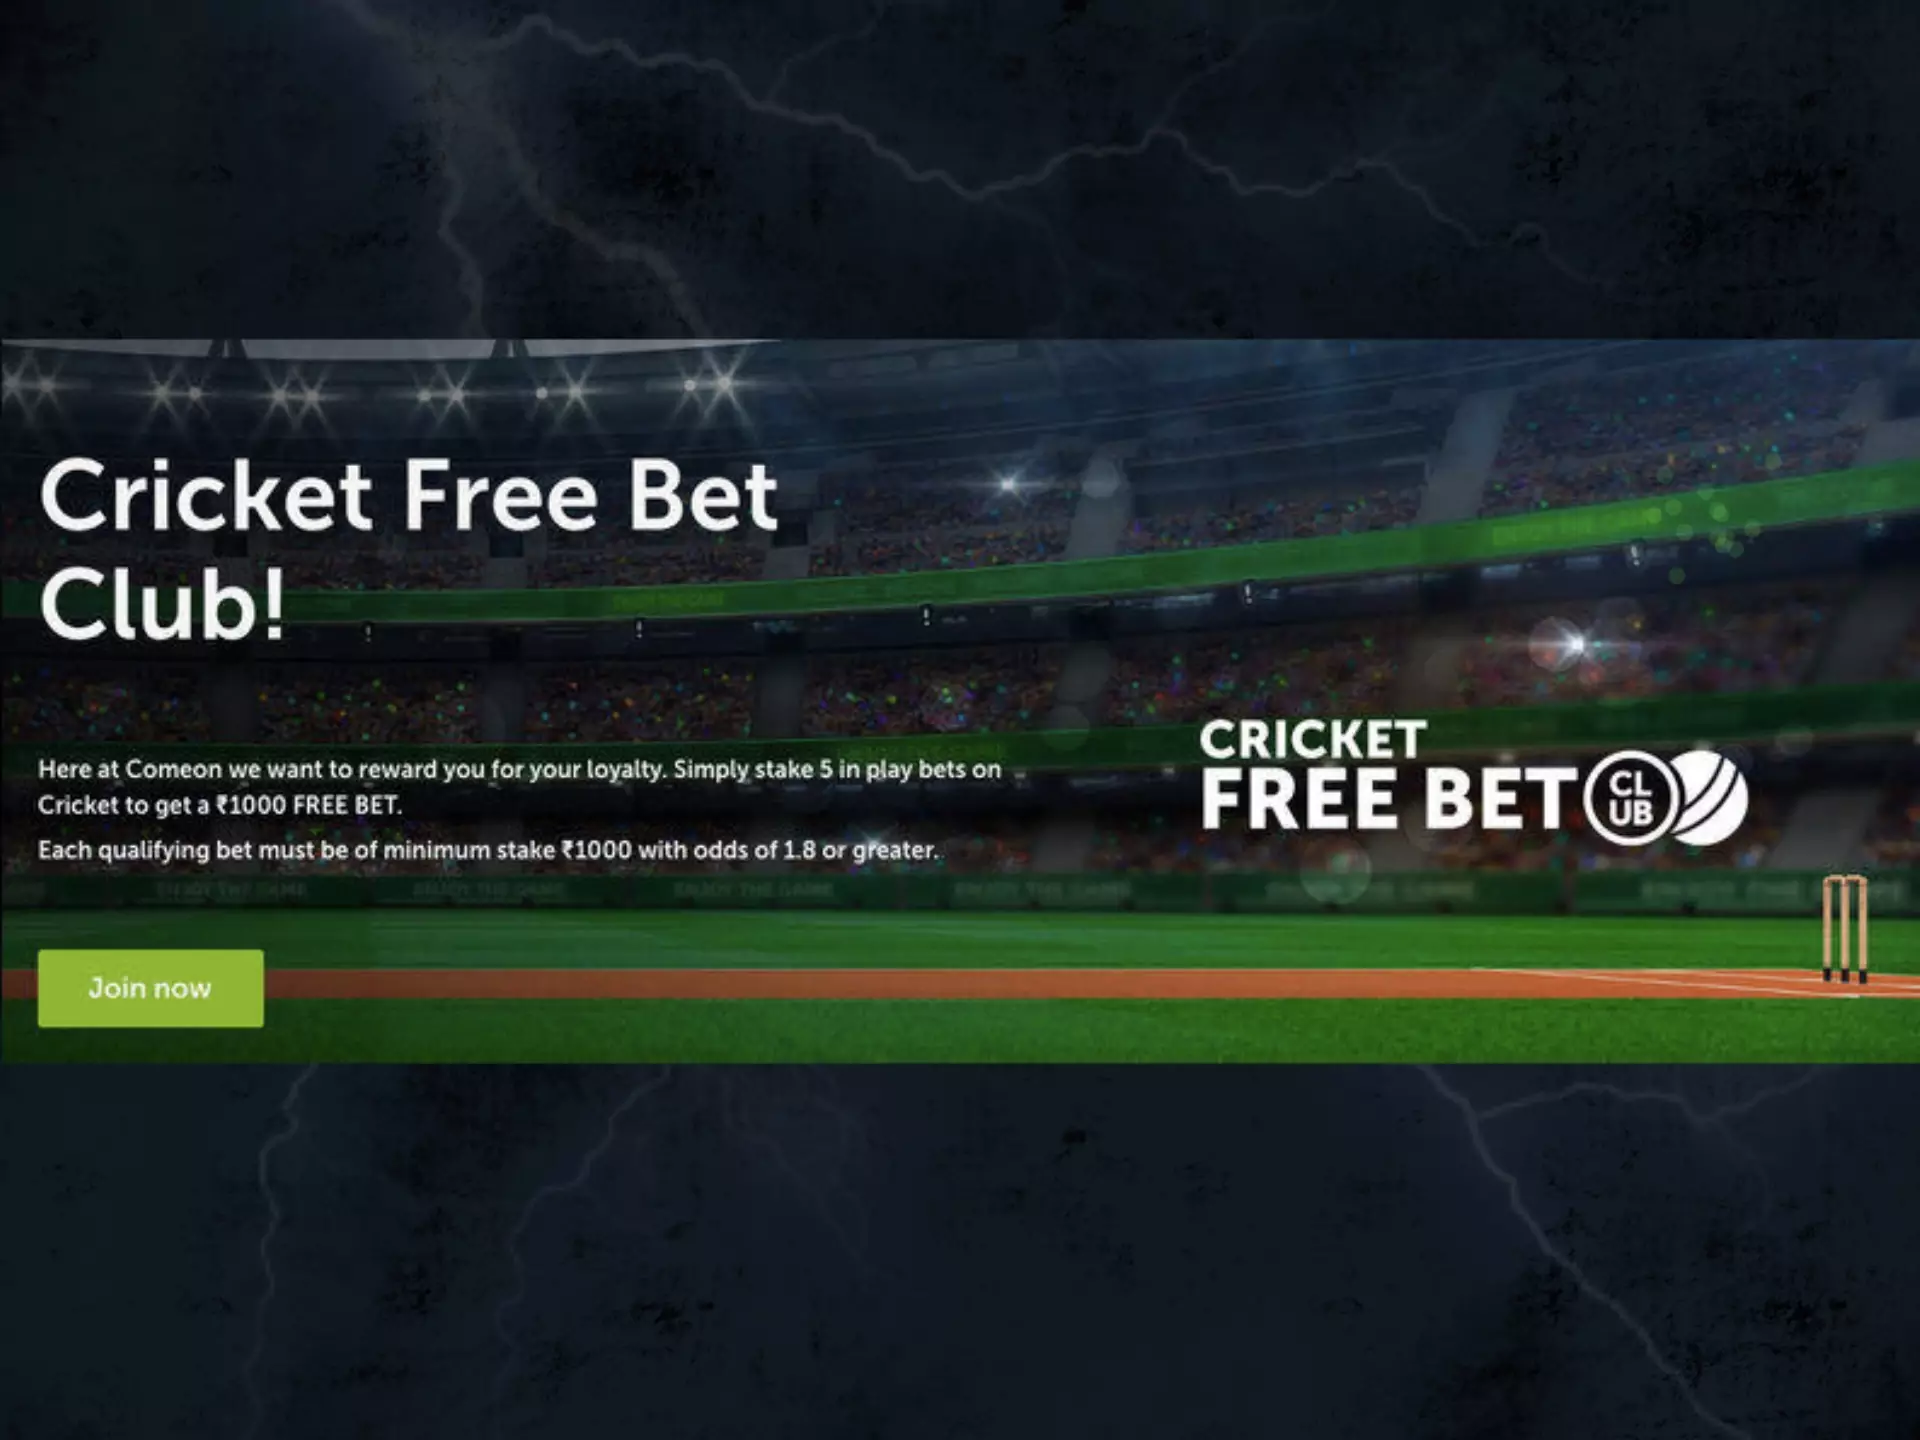 Use this bonus to take your chance to win even more from cricket betting.